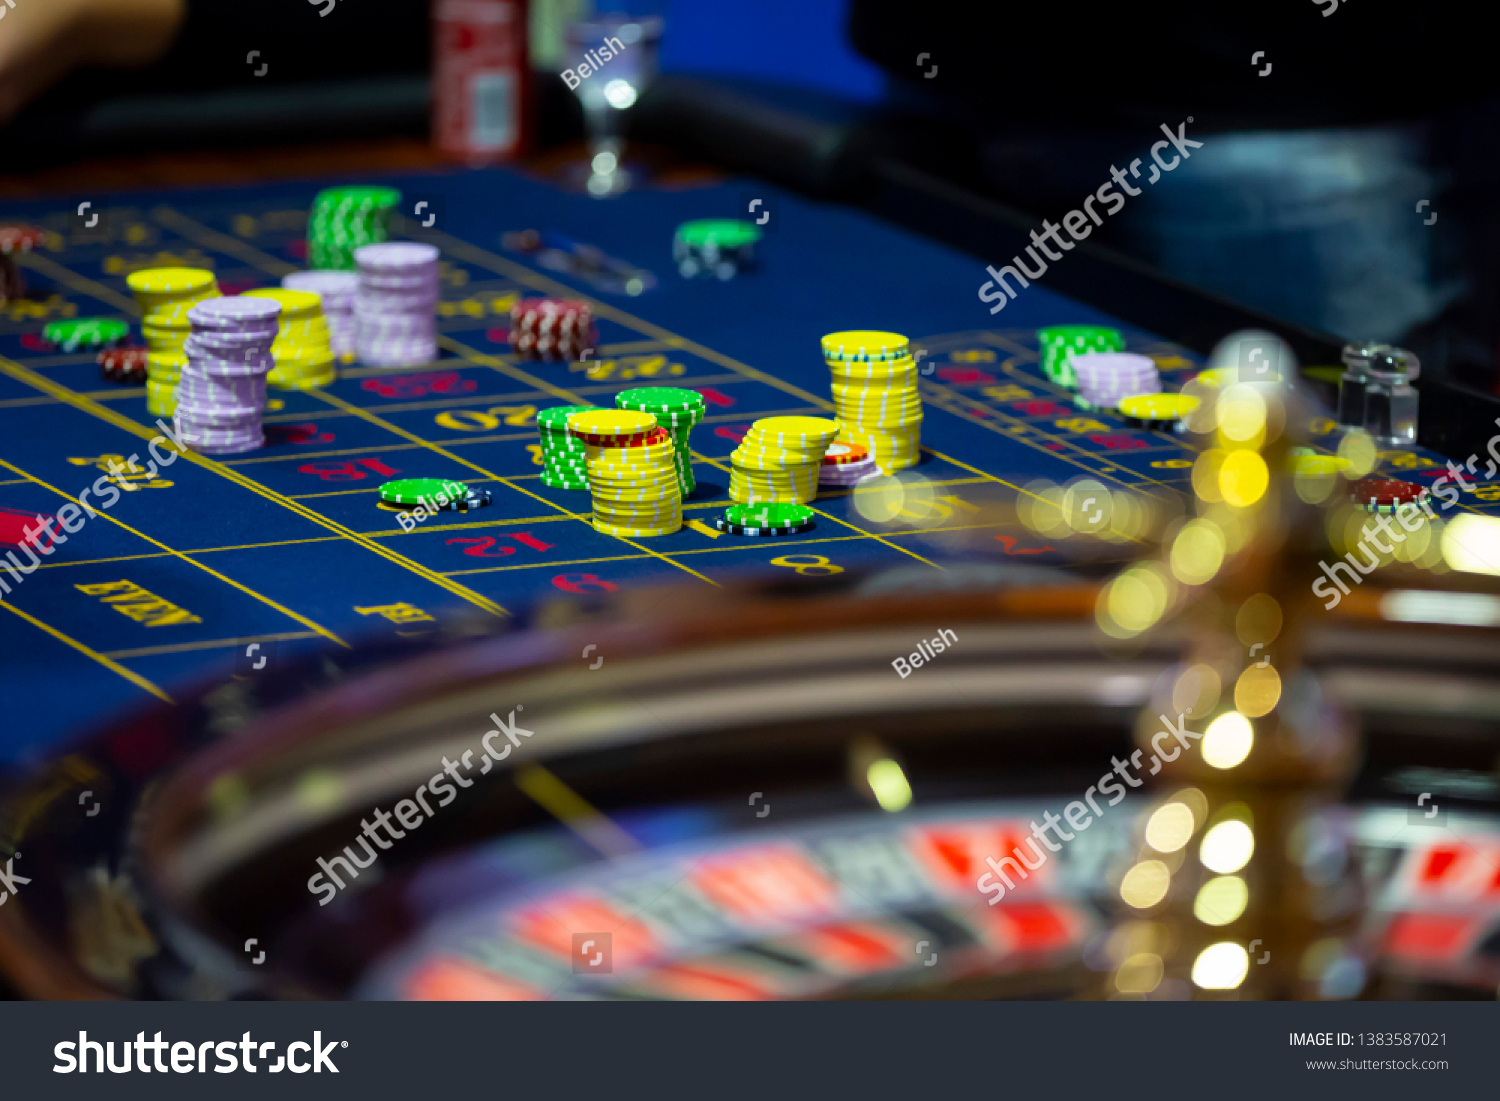 Roulette table with human hands putting down chips in casino. Roulette wheel in the foreground. Gamble game. Unrecognizable people. #1383587021